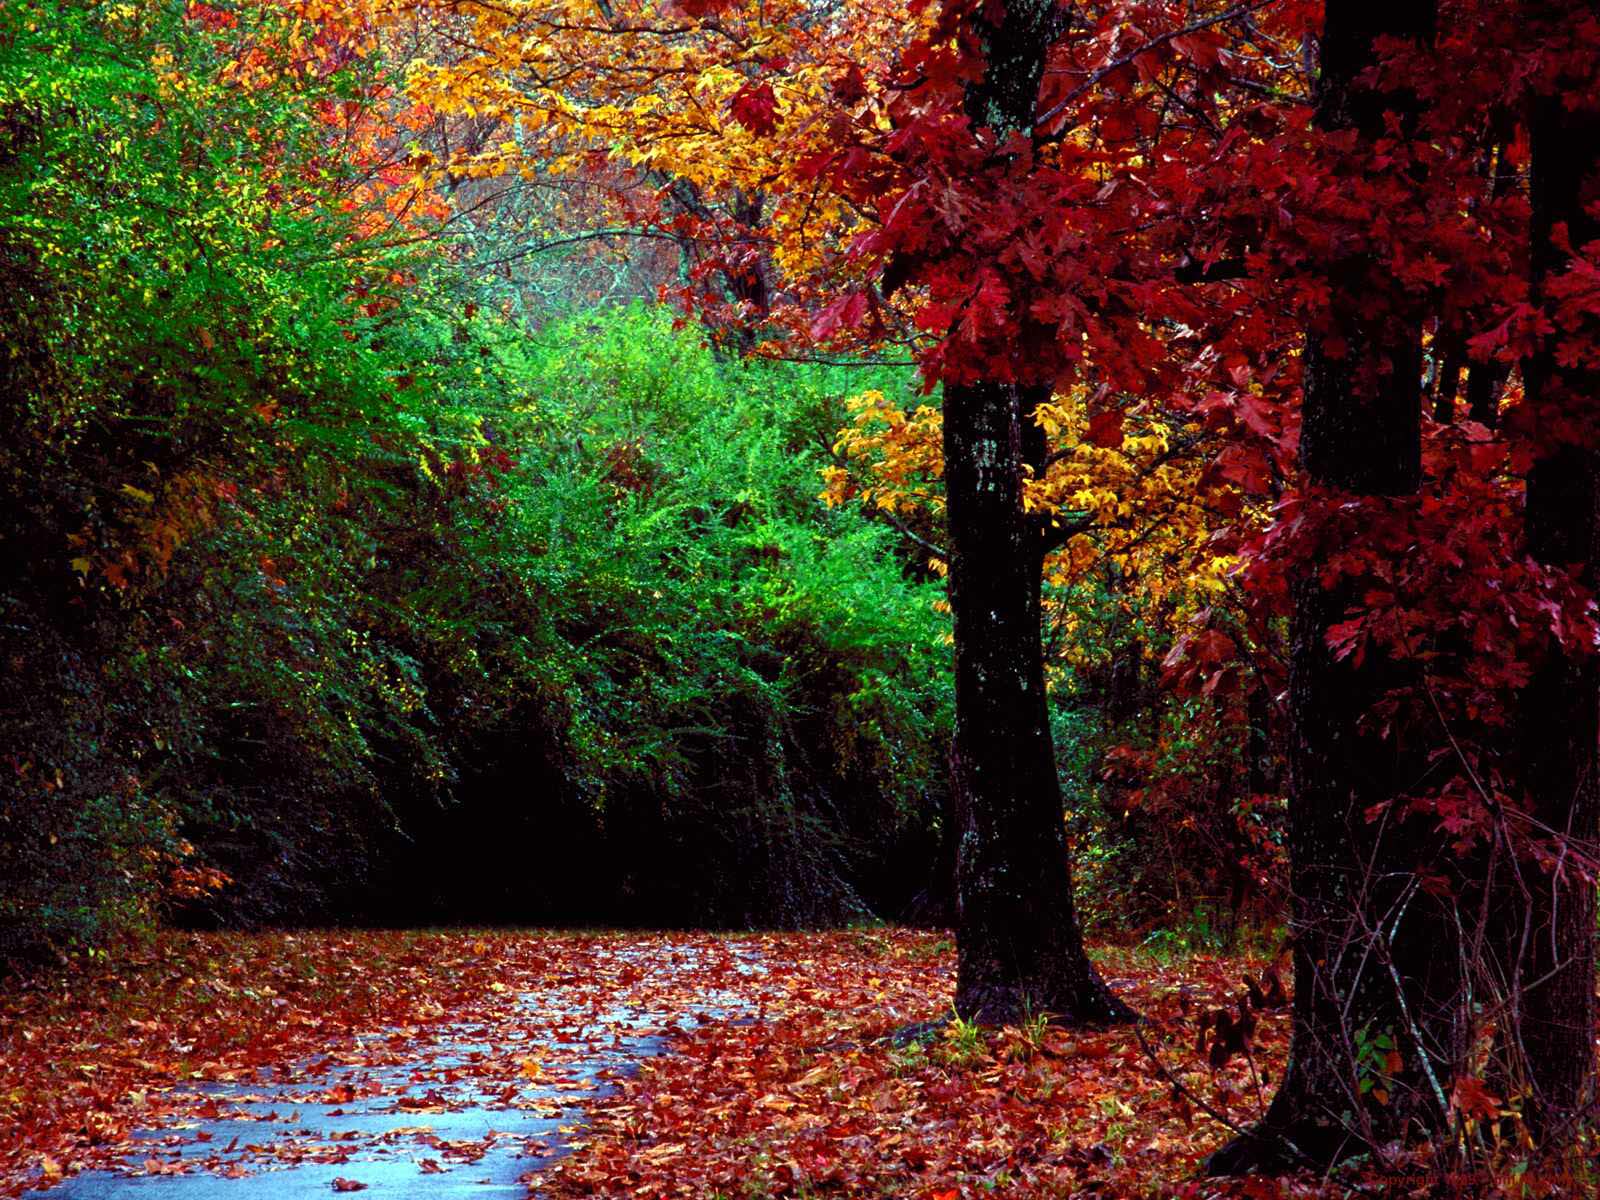 Autumn Wallpapers Widescreen Free Images Fun